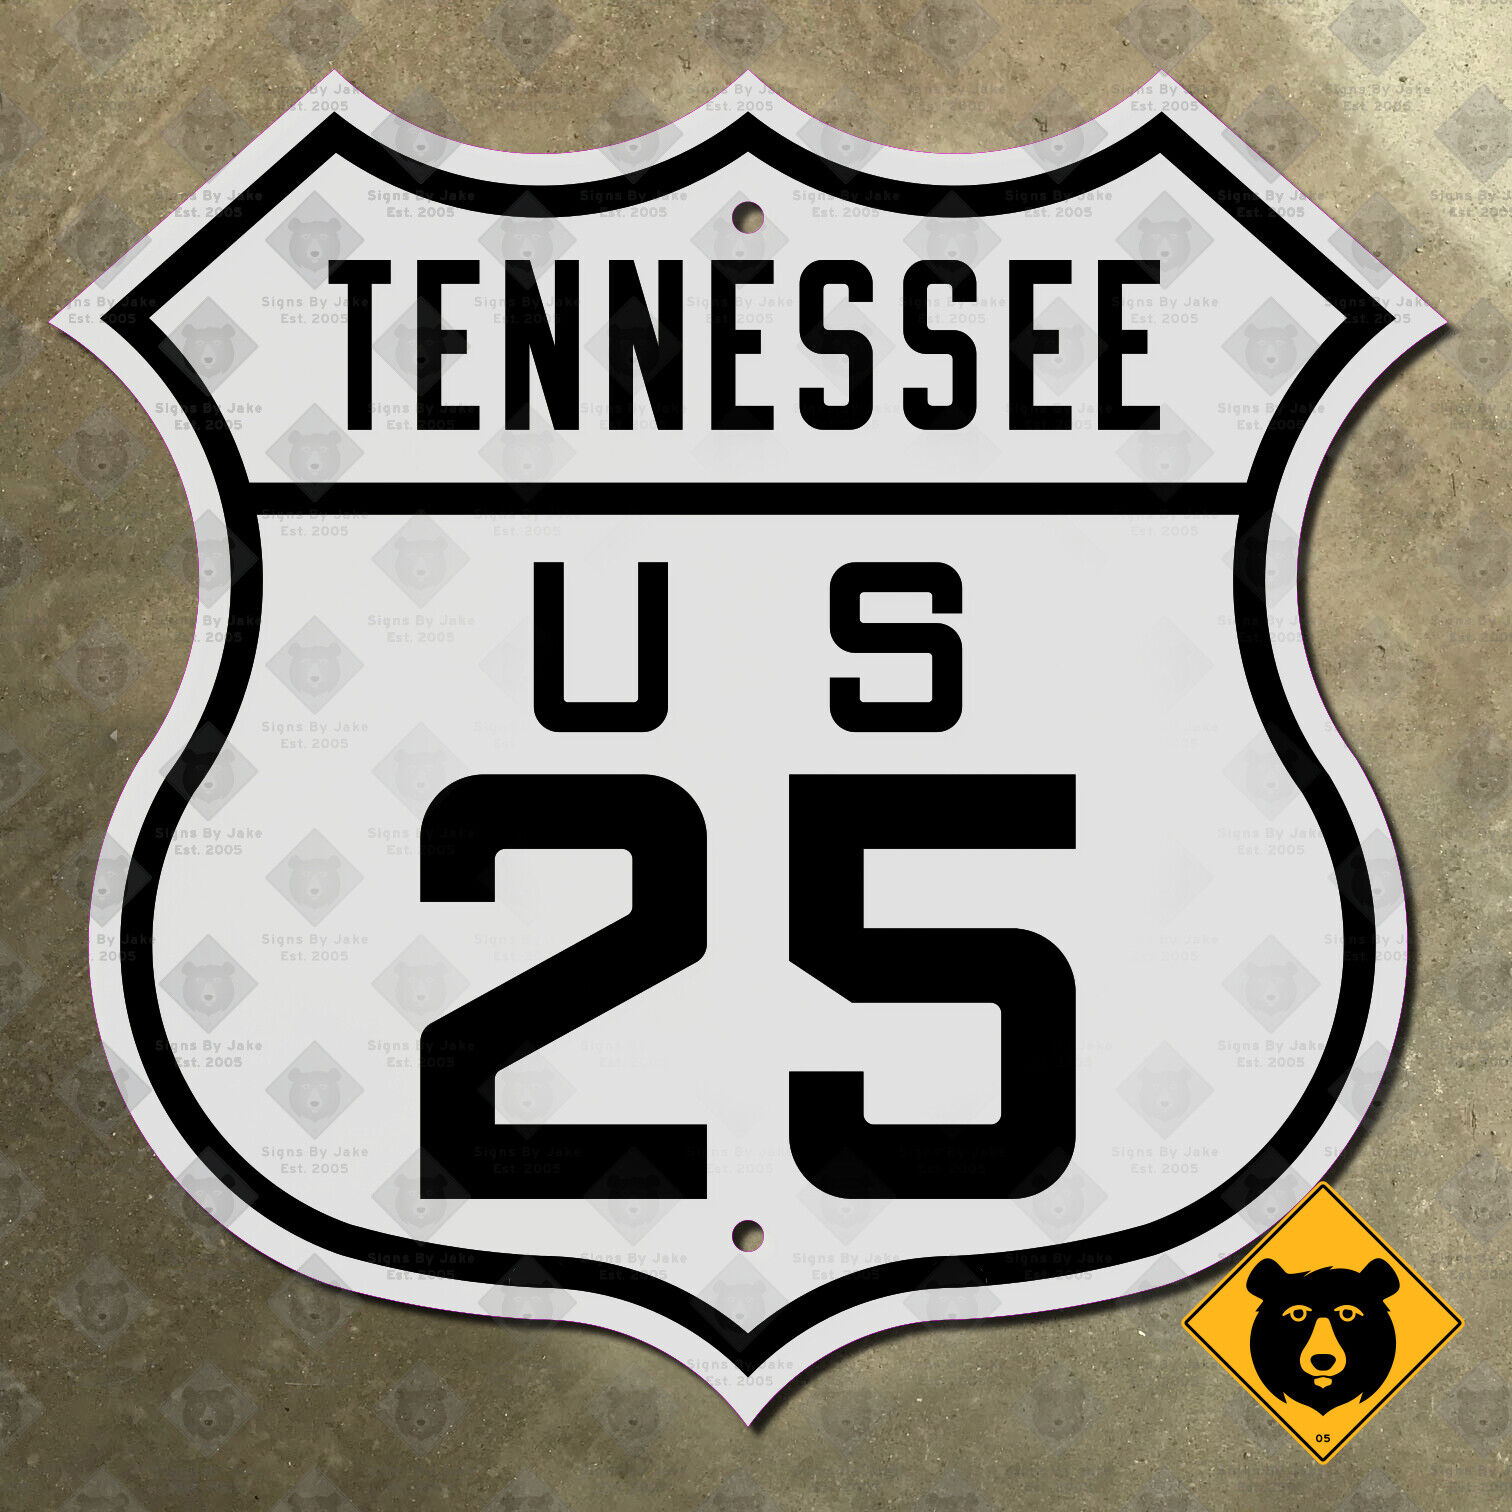 Tennessee US Route 25 highway marker road sign Cherokee National Forest 24x24